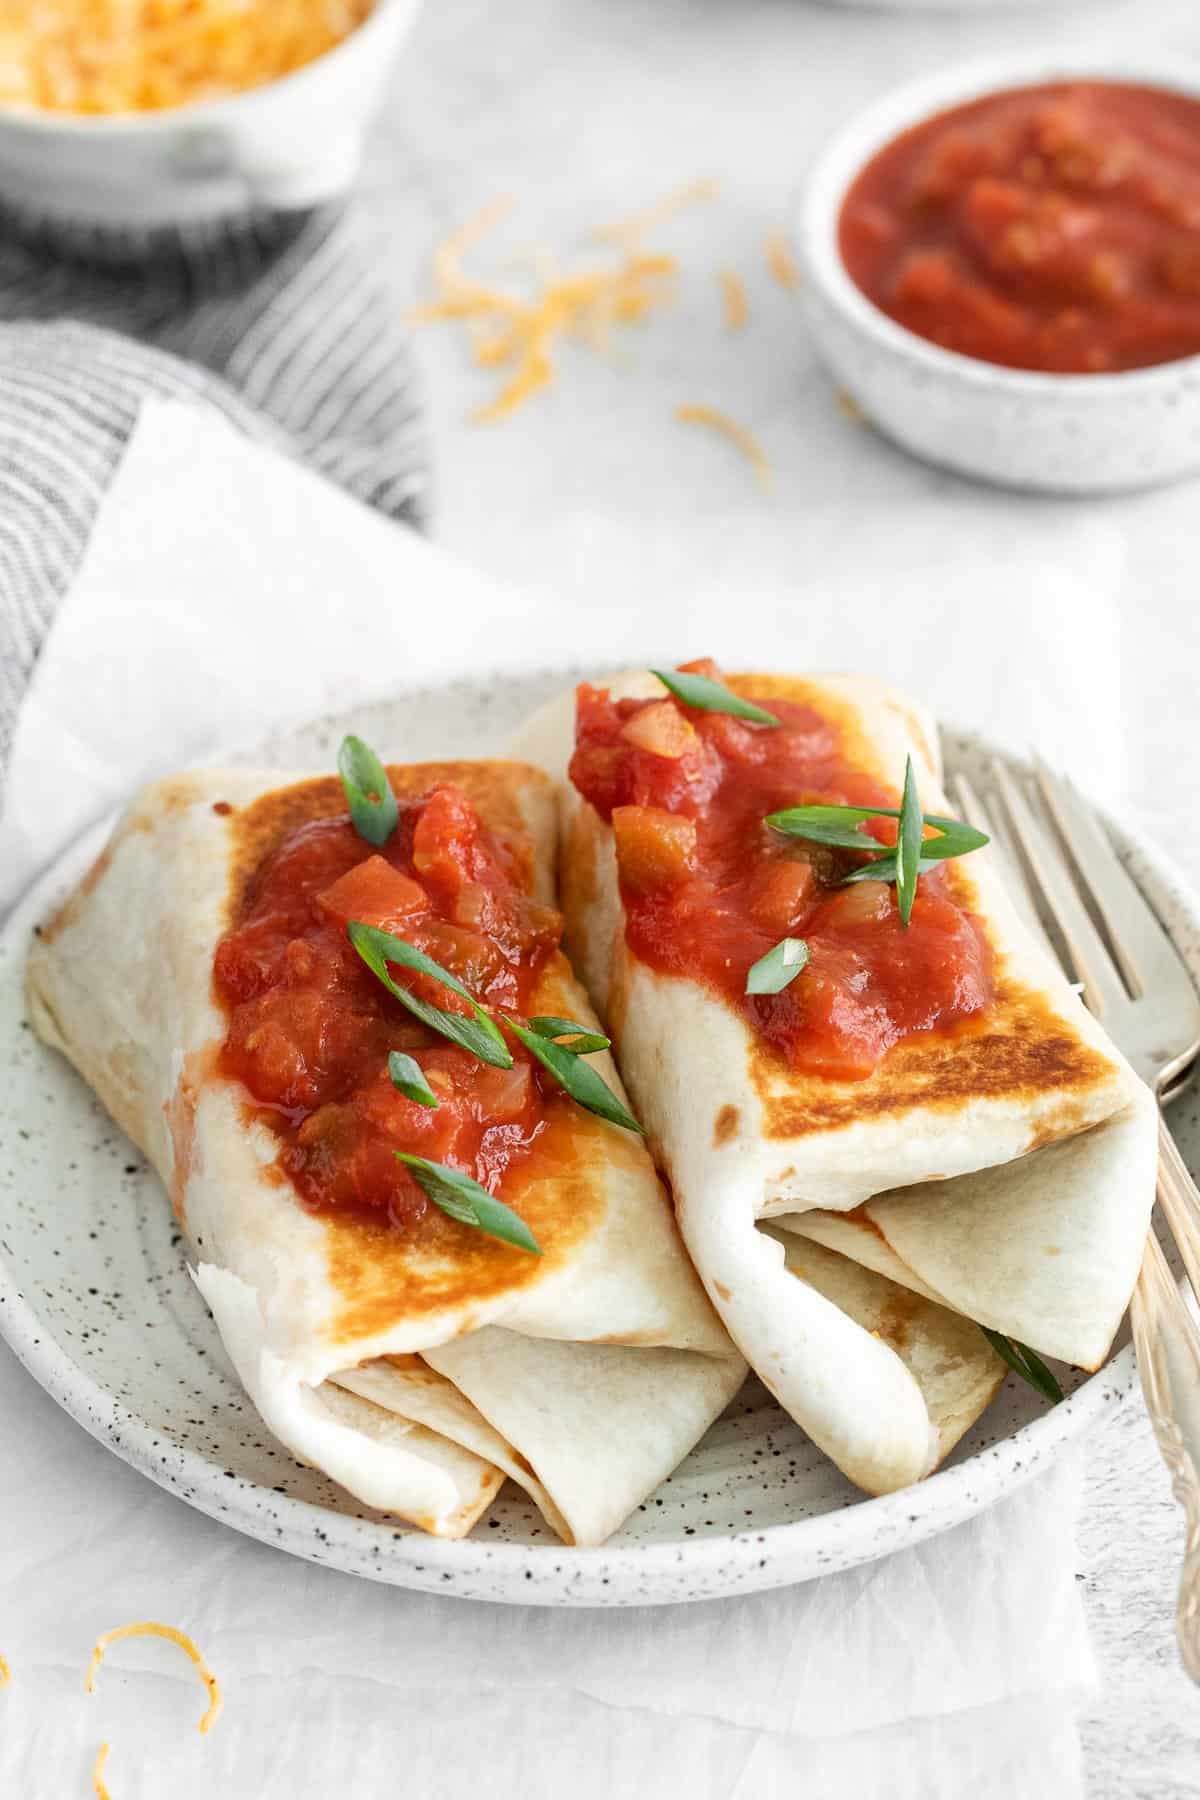 Bean and cheese burritos topped with salsa on a plate.